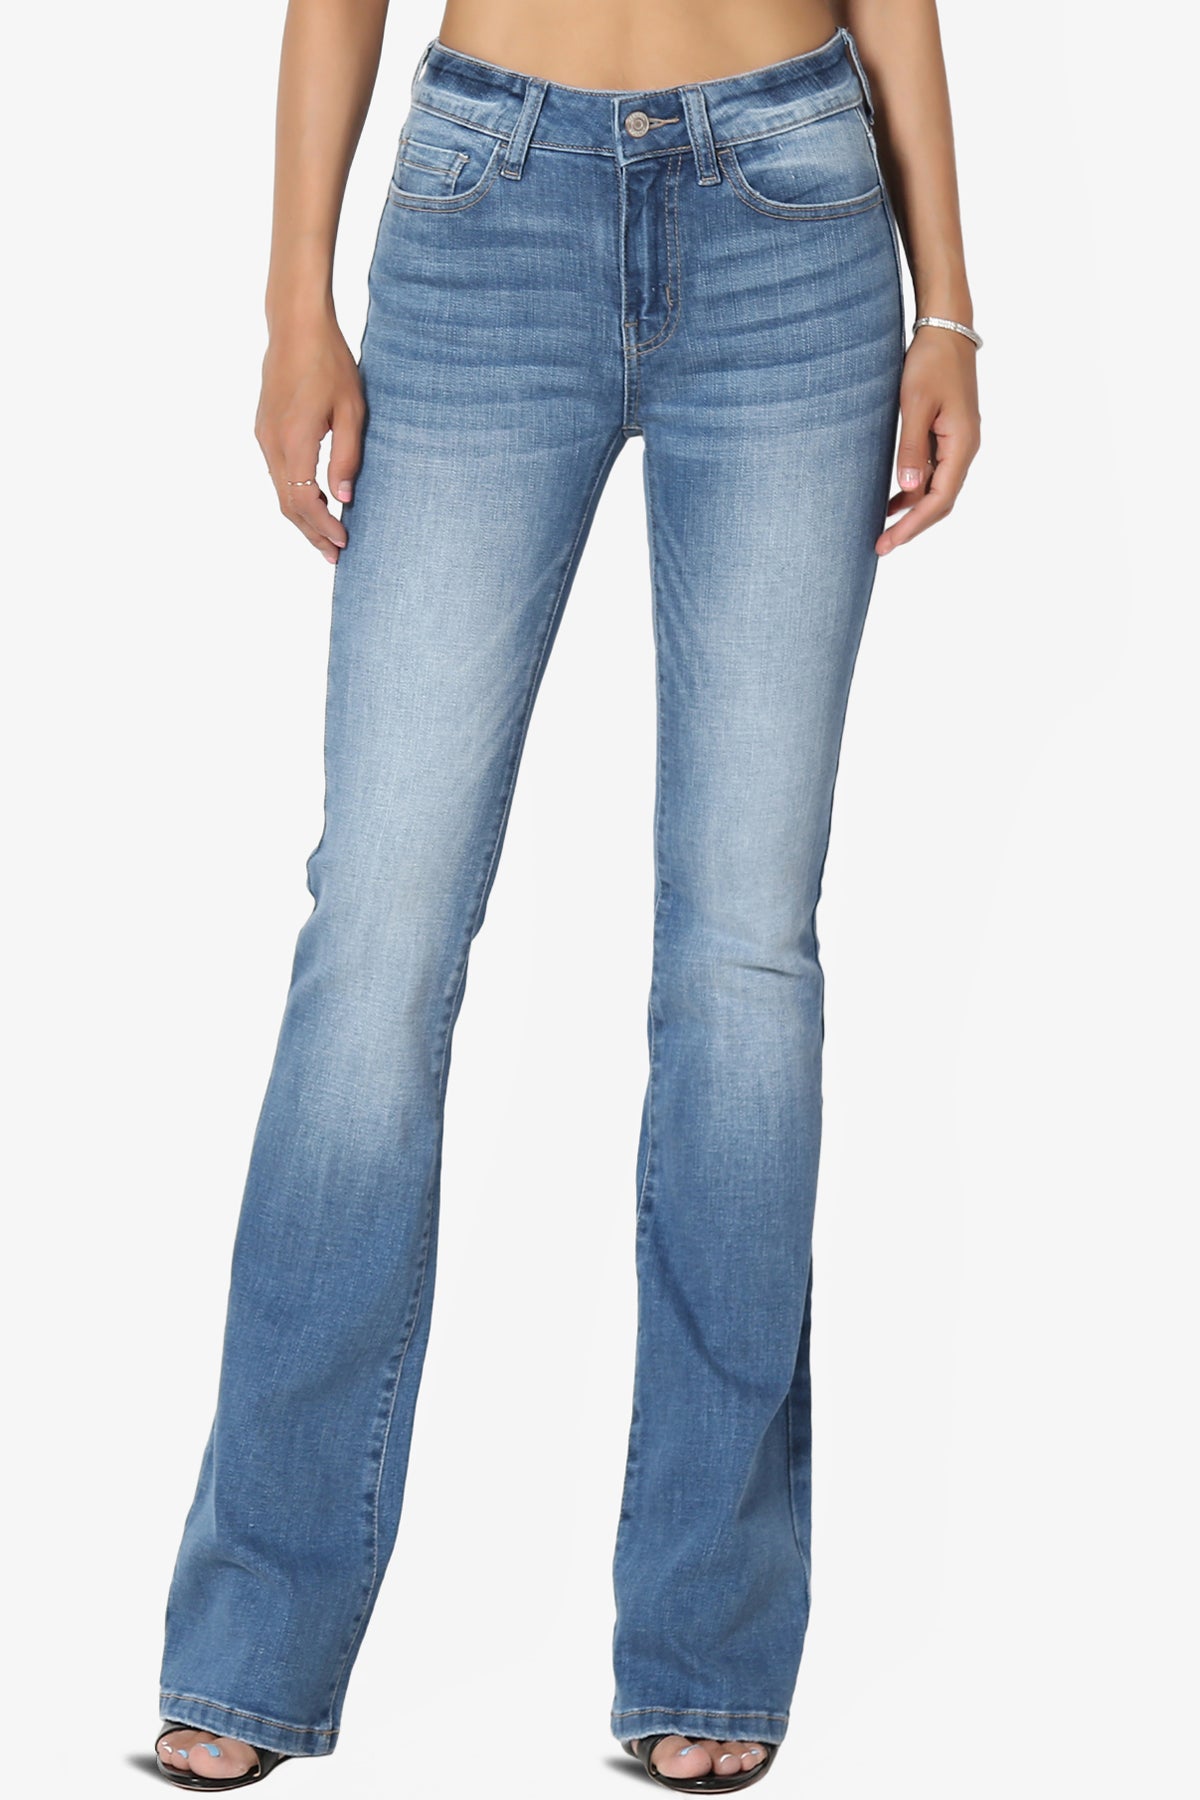 Clyde Washed Mid Rise Boot Cut Jeans in Med